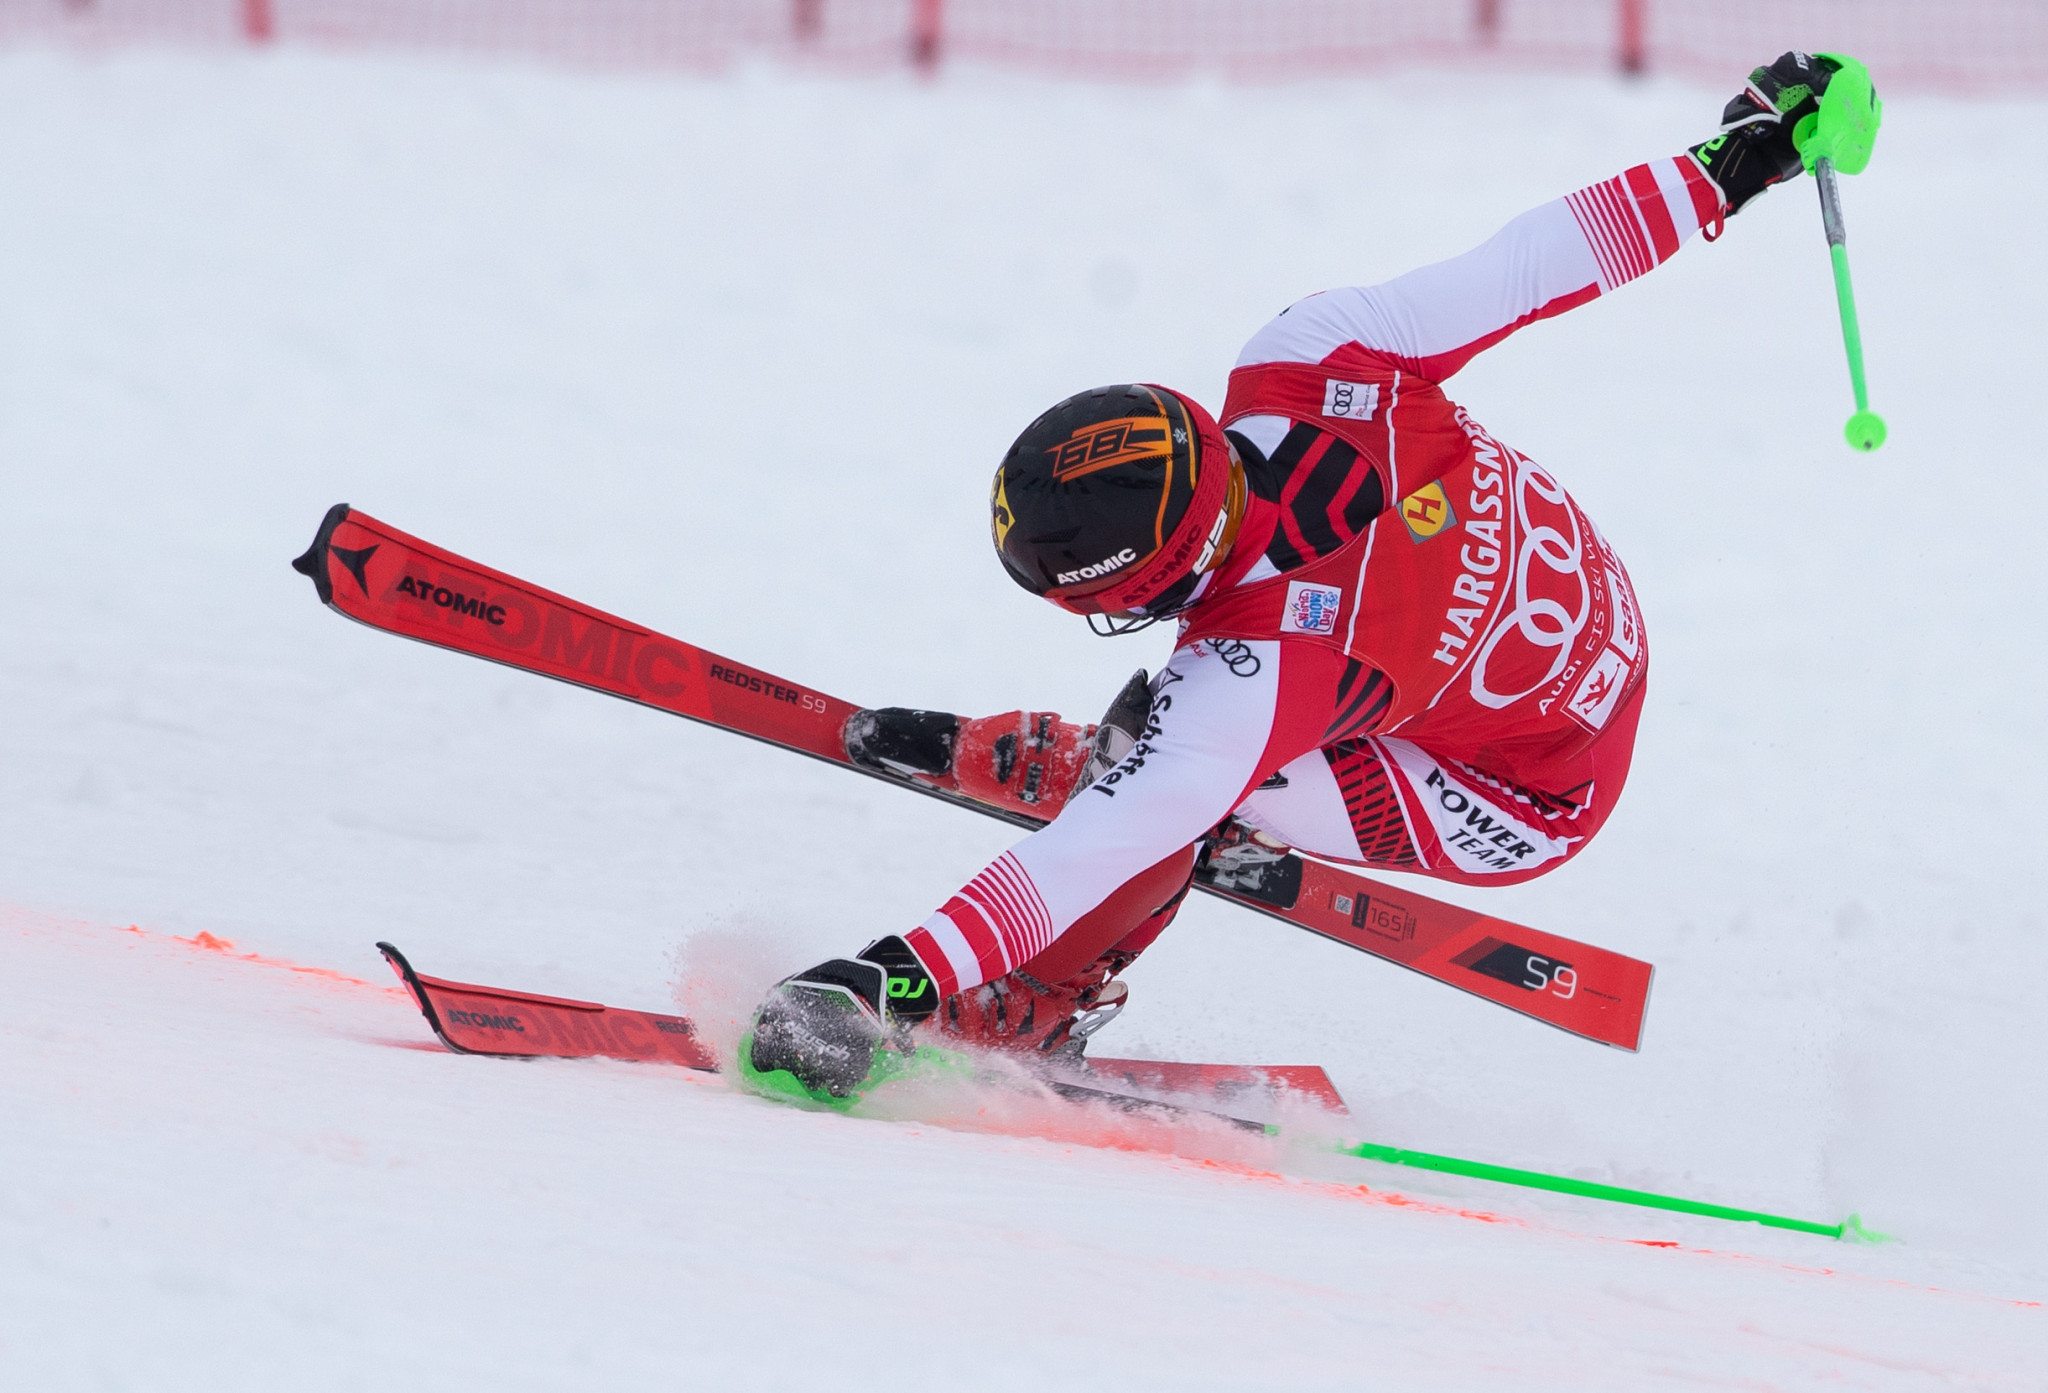 Marcel Hirscher won the slalom event at the FIS Alpine Skiing World Cup in Saalbach-Hinterglemm to become the greatest Austrian skier of all time ©Getty Images